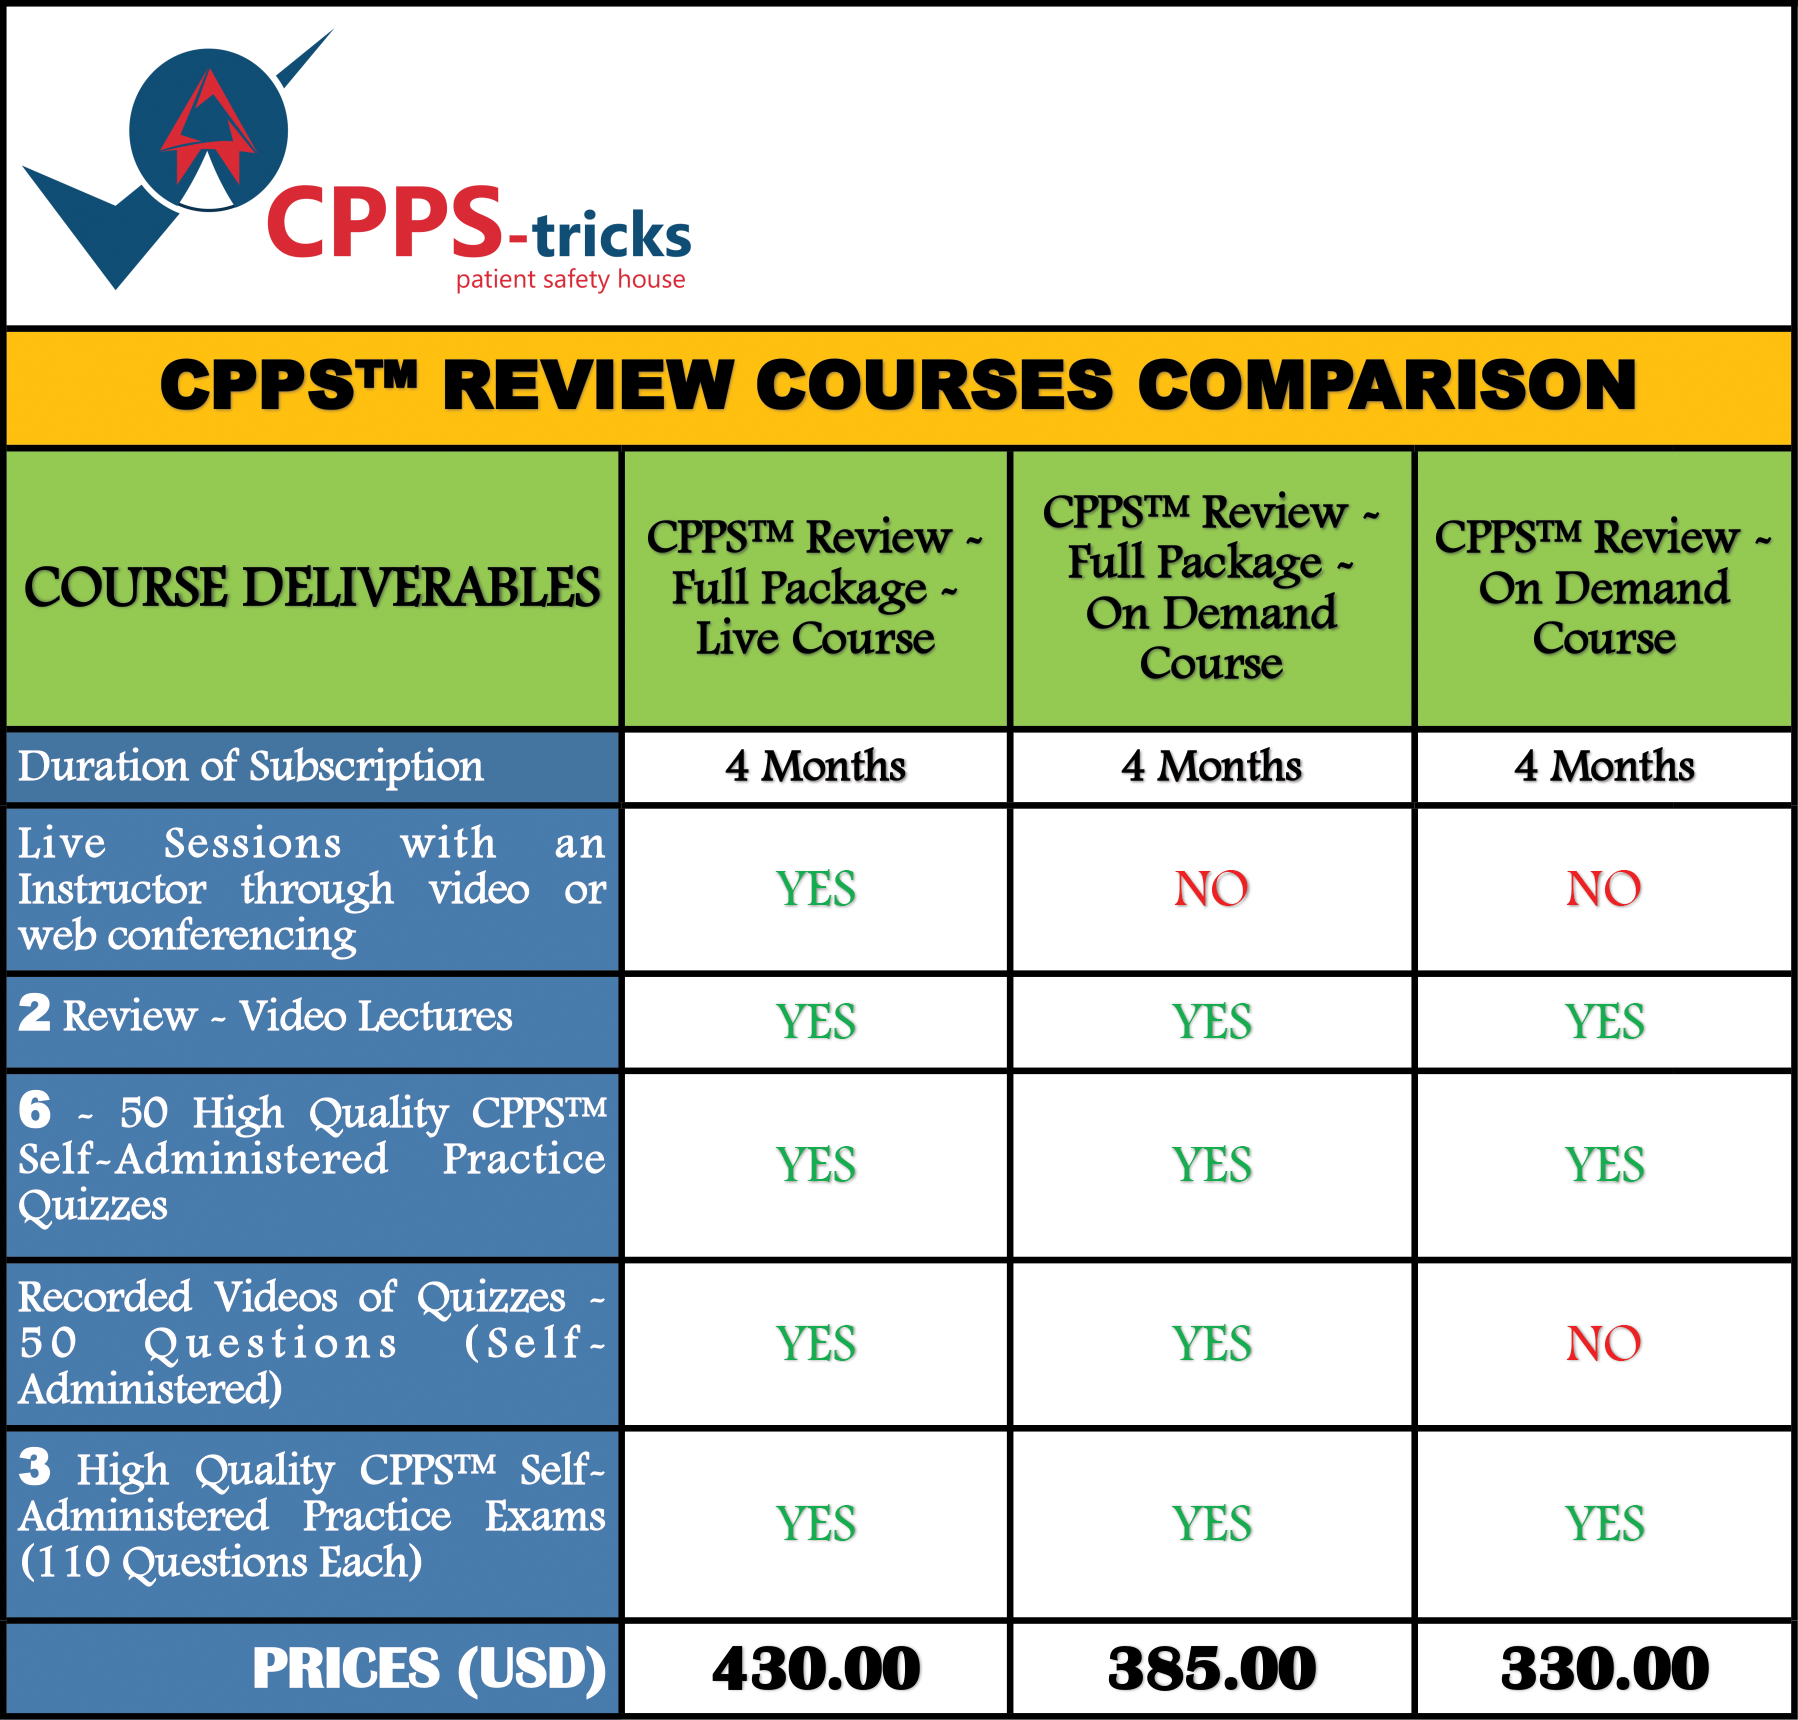 CPPS Review Course Comparisons